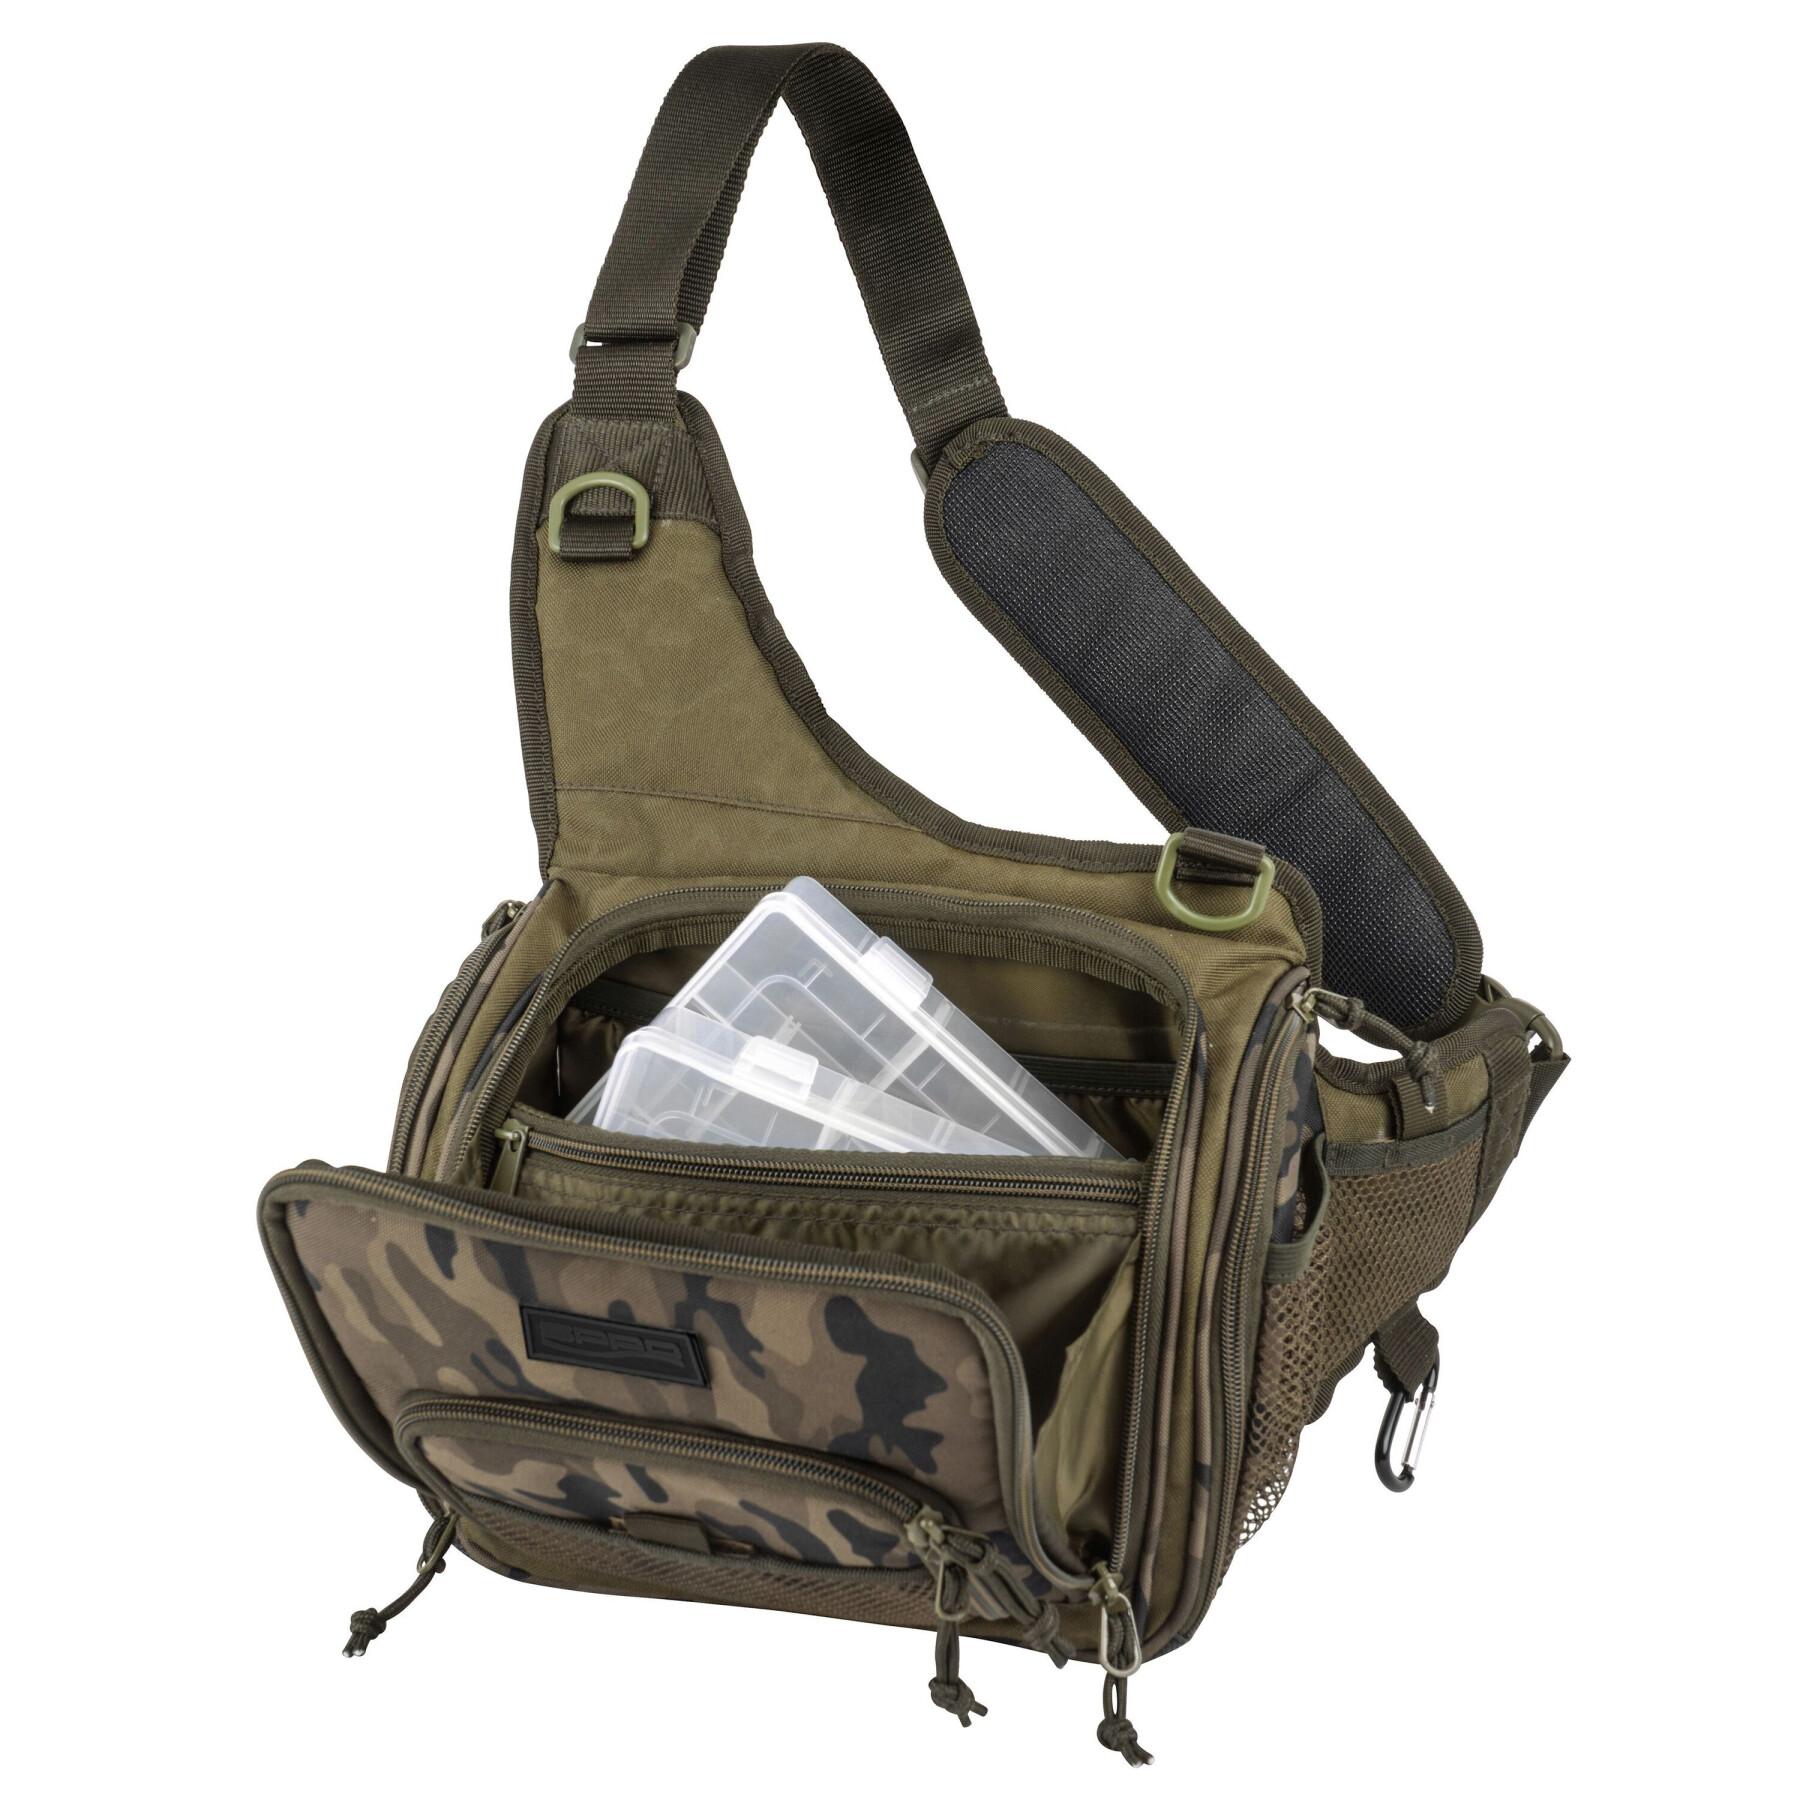 Bolso Spro Double Camouflage